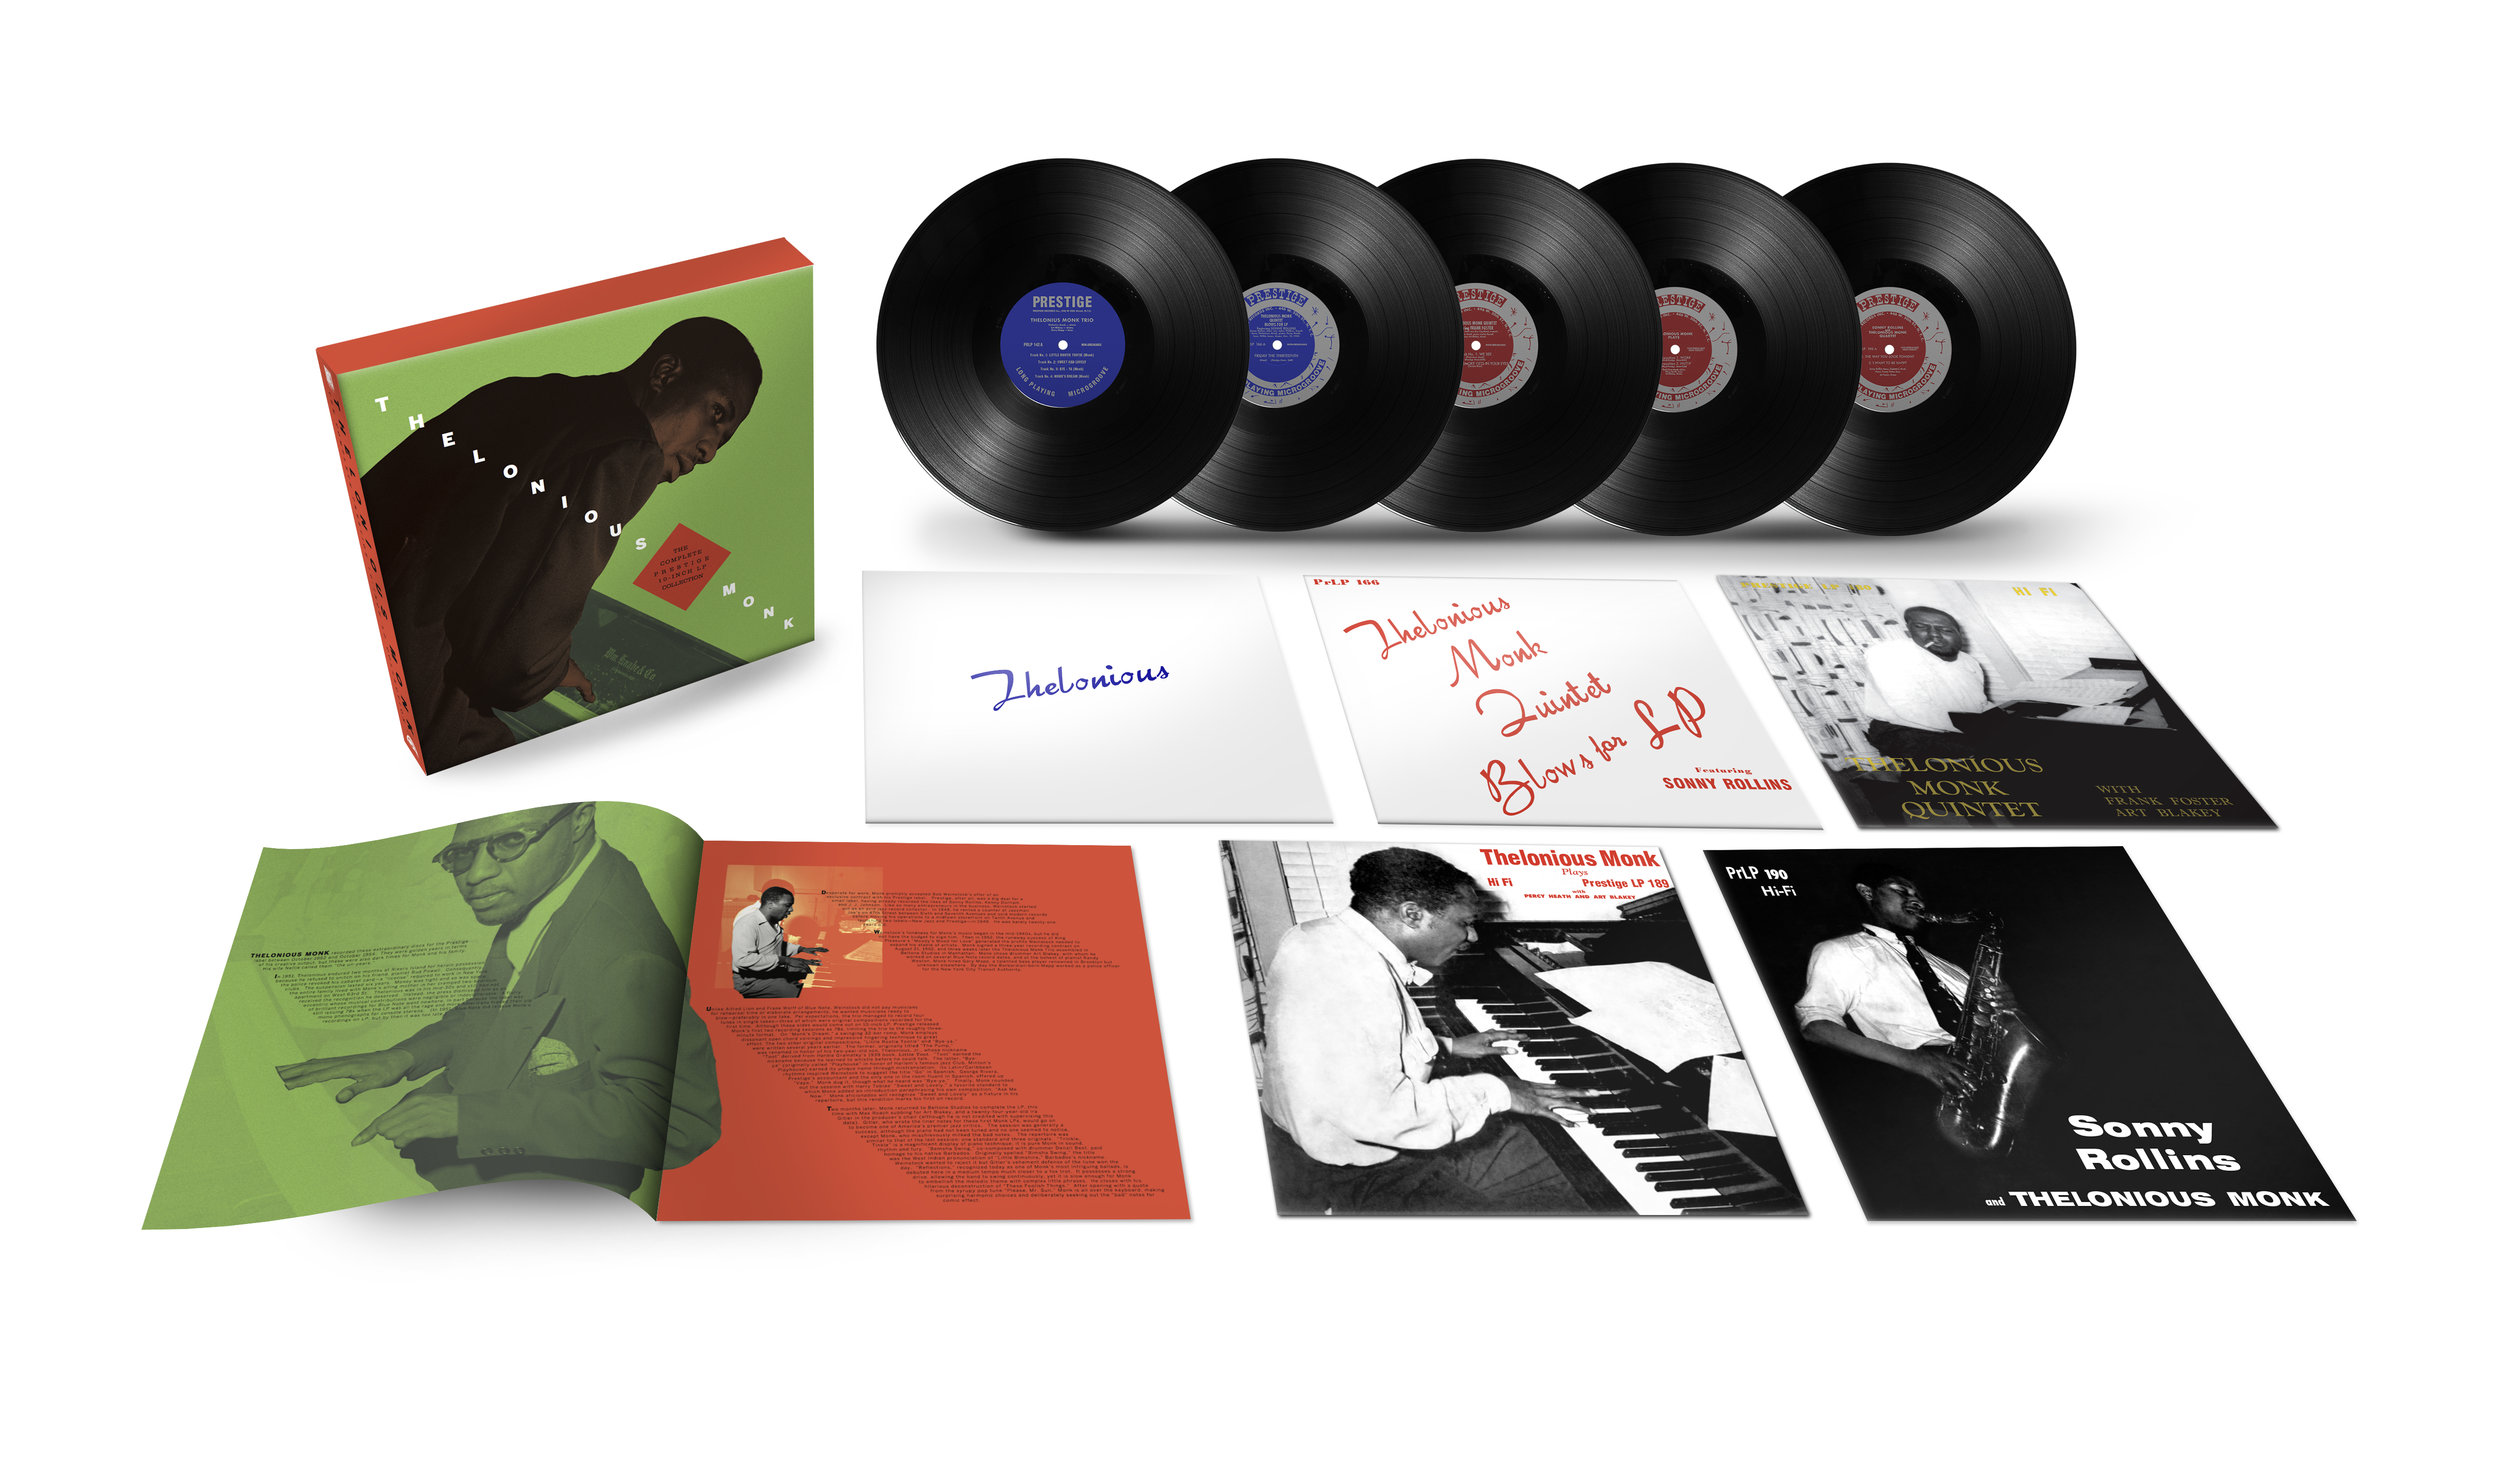 THELONIOUS MONK | The Complete Prestige 10-Inch LP Collection (Vinyl 5-LP Box Set) | (Compilation Producer). Released 12/15/17.#15: Historical Album of the Year, DownBeat Readers Poll (2018)